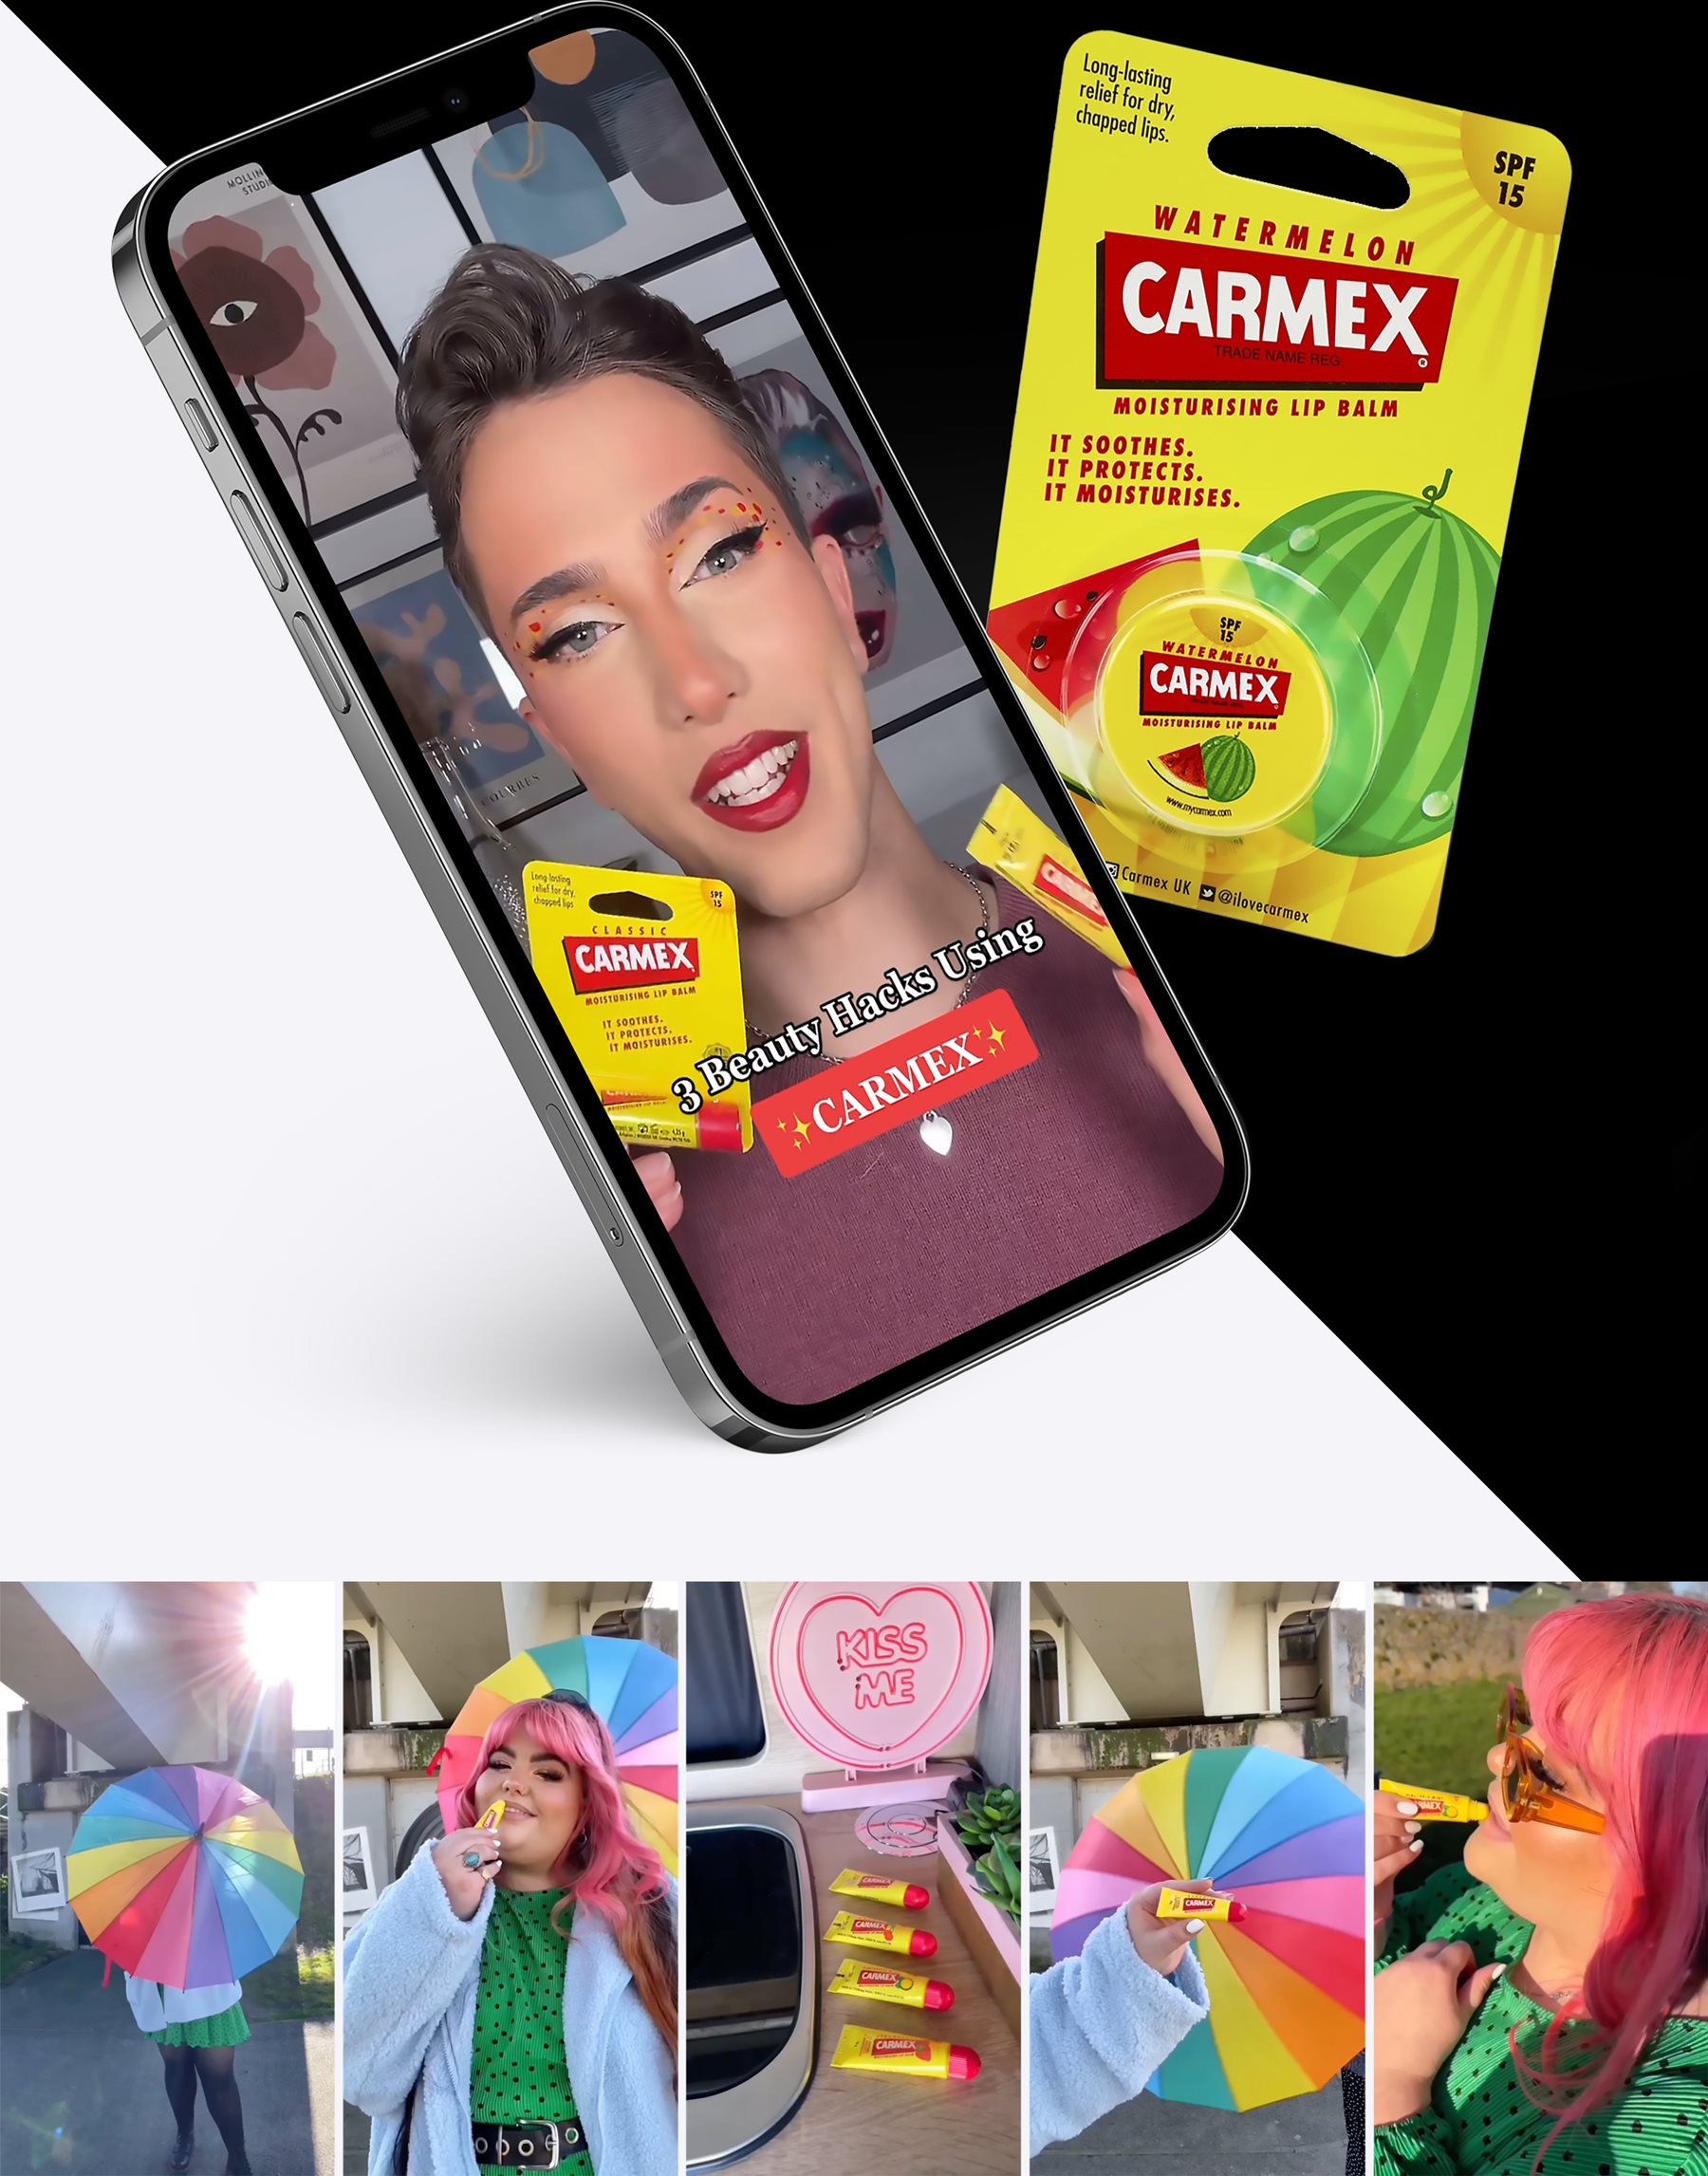 A diagonal phone with model and a carmex product in yellow packaging